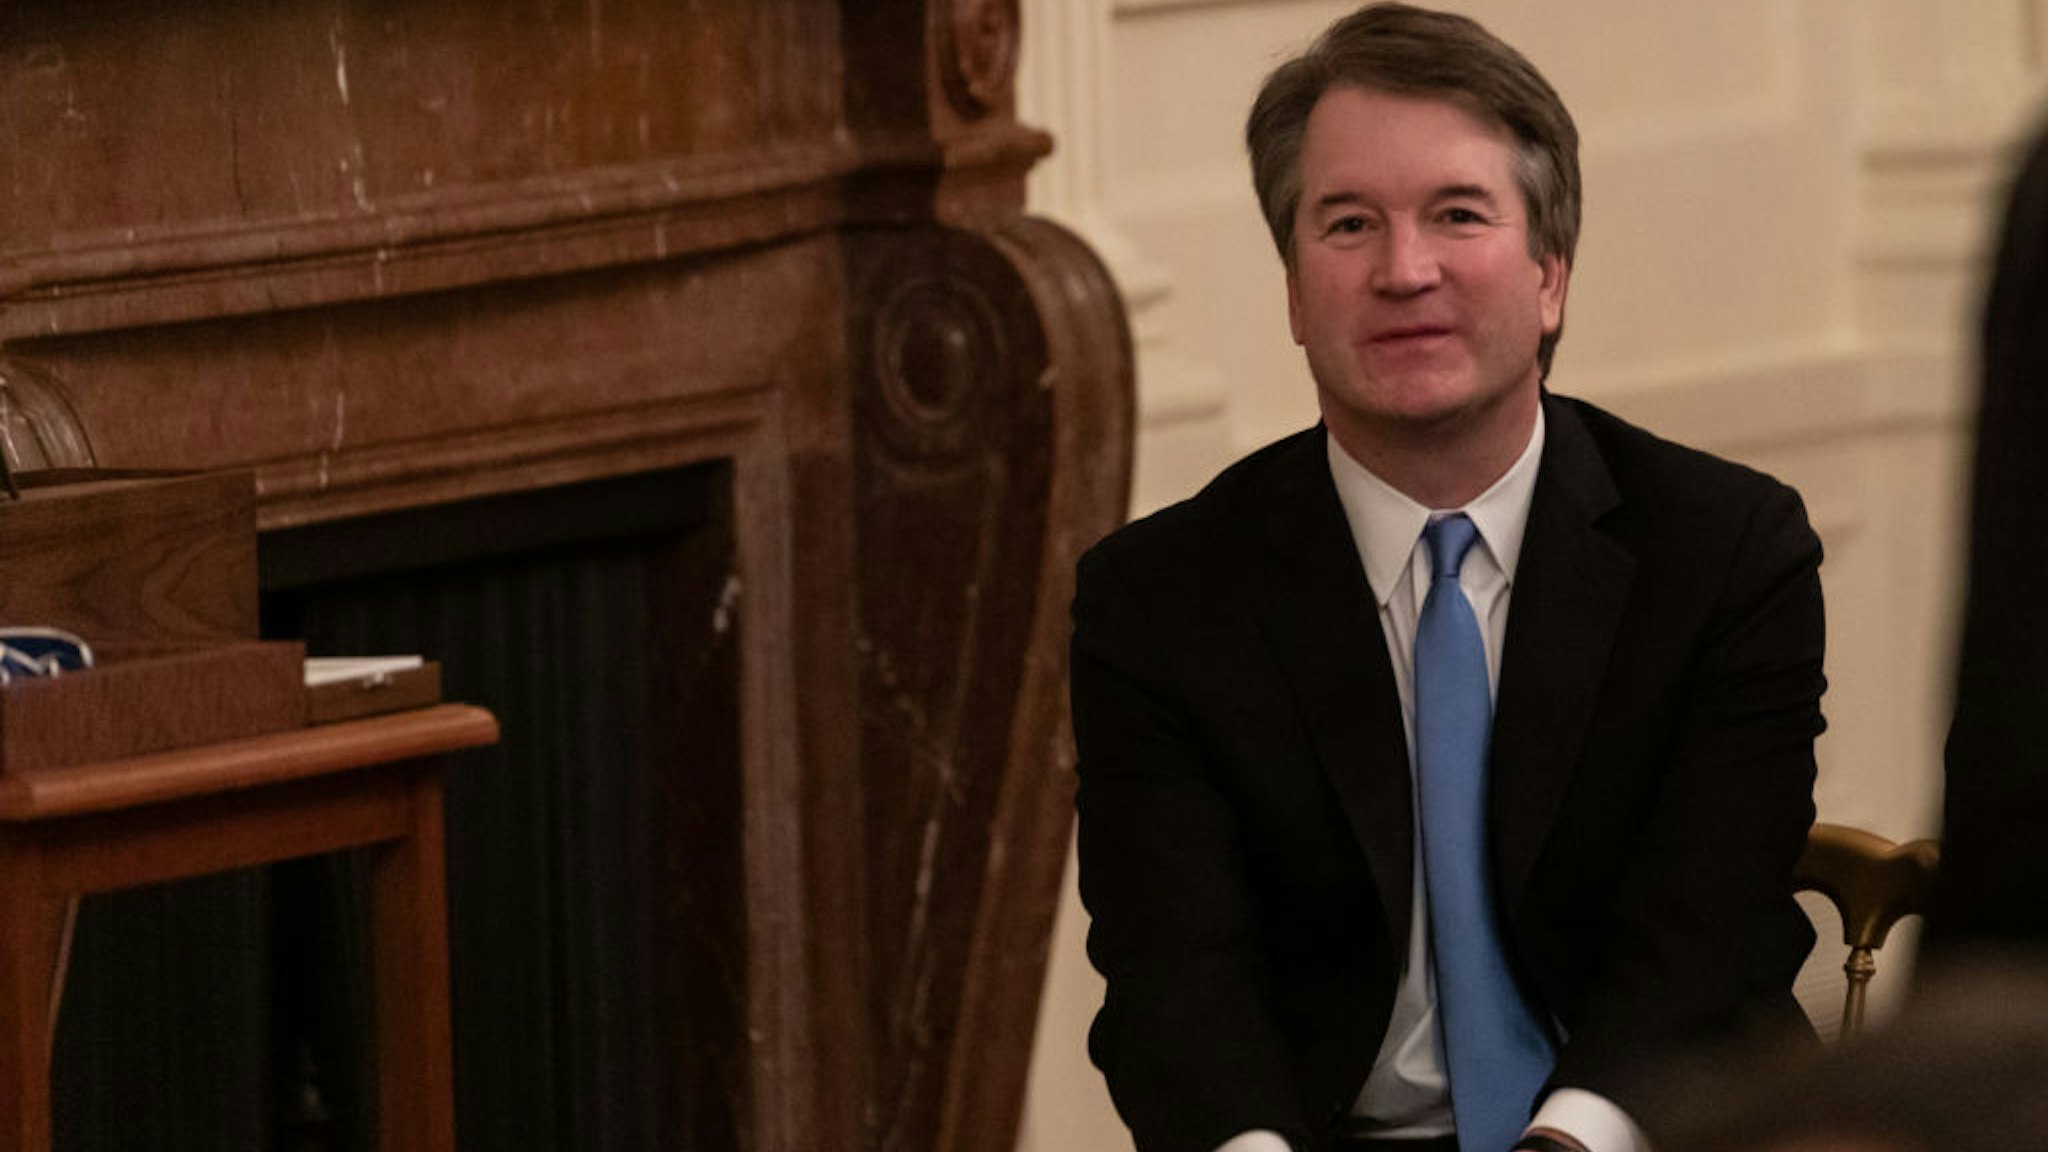 U.S. Supreme Court Associate Justice Brett Kavanaugh attends the Presidential Medal of Freedom ceremony in the East Room of the White House in Washington, D.C., on Friday, Nov. 16, 2018.